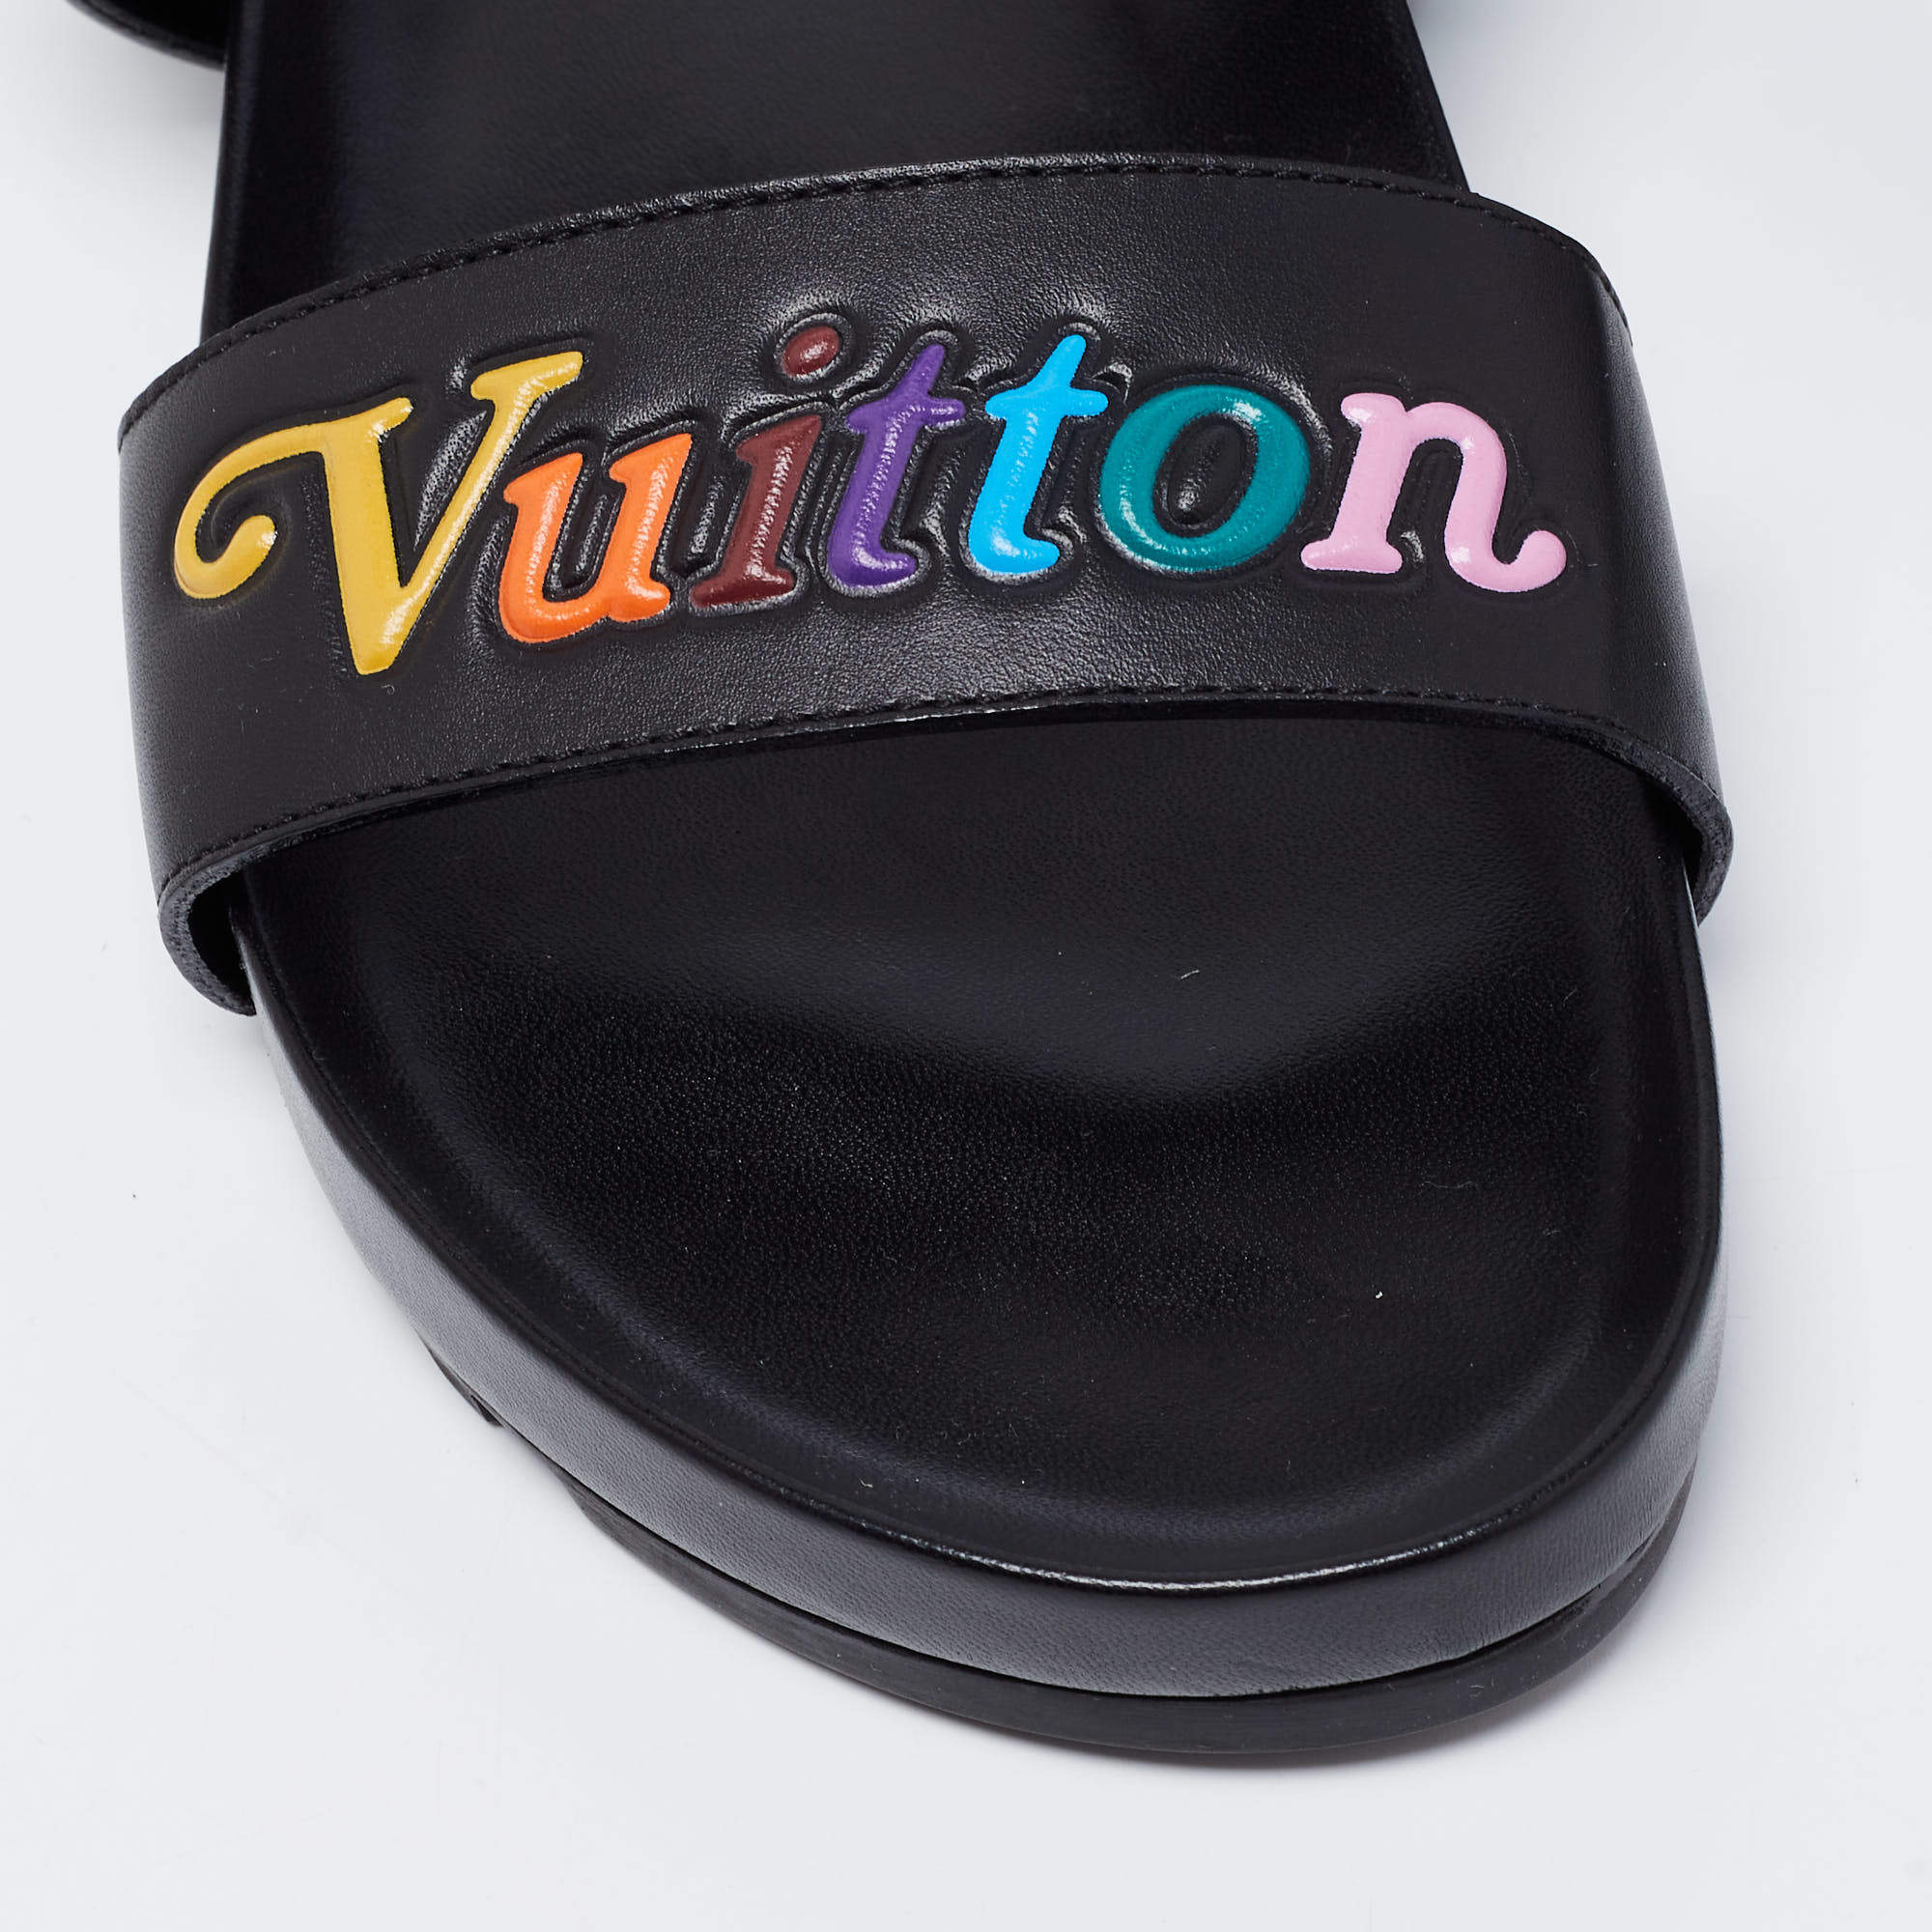 Louis Vuitton - Authenticated Bom Dia Sandal - Leather Black for Women, Very Good Condition